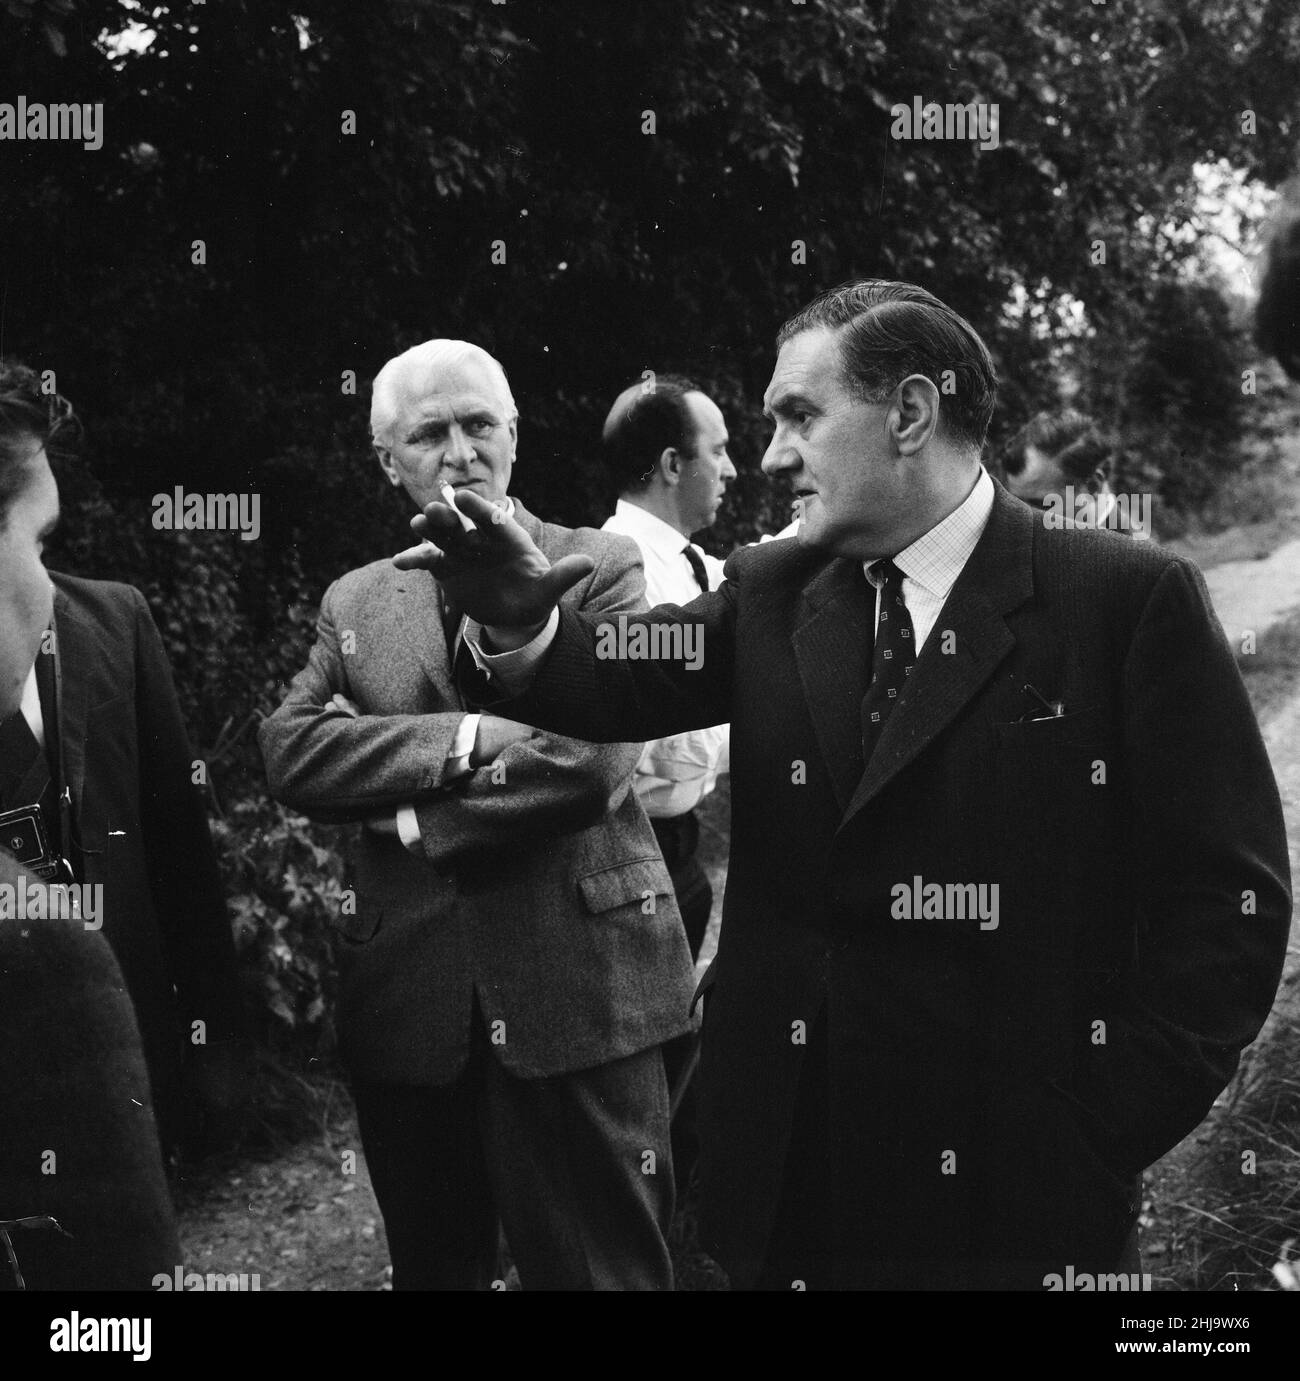 Leatherslade Farm, between Oakley and Brill in Buckinghamshire, hideout used by gang, 27 miles from the crime scene, Tuesday 13th August 1963. Our Picture Shows ... (foreground, holding cigarette) Detective Superintendent Gerald McArthur of Scotland Yard and Detective Superintendent Malcolm Fewtrell, Head of Buckinghamshire CID at farmhouse.   The 1963 Great Train Robbery was the robbery of 2.6 million pounds from a Royal Mail train heading from Glasgow to London on the West Coast Main Line in the early hours of 8th August 1963, at Bridego Railway Bridge, Ledburn, near Mentmore in  Buckinghams Stock Photo